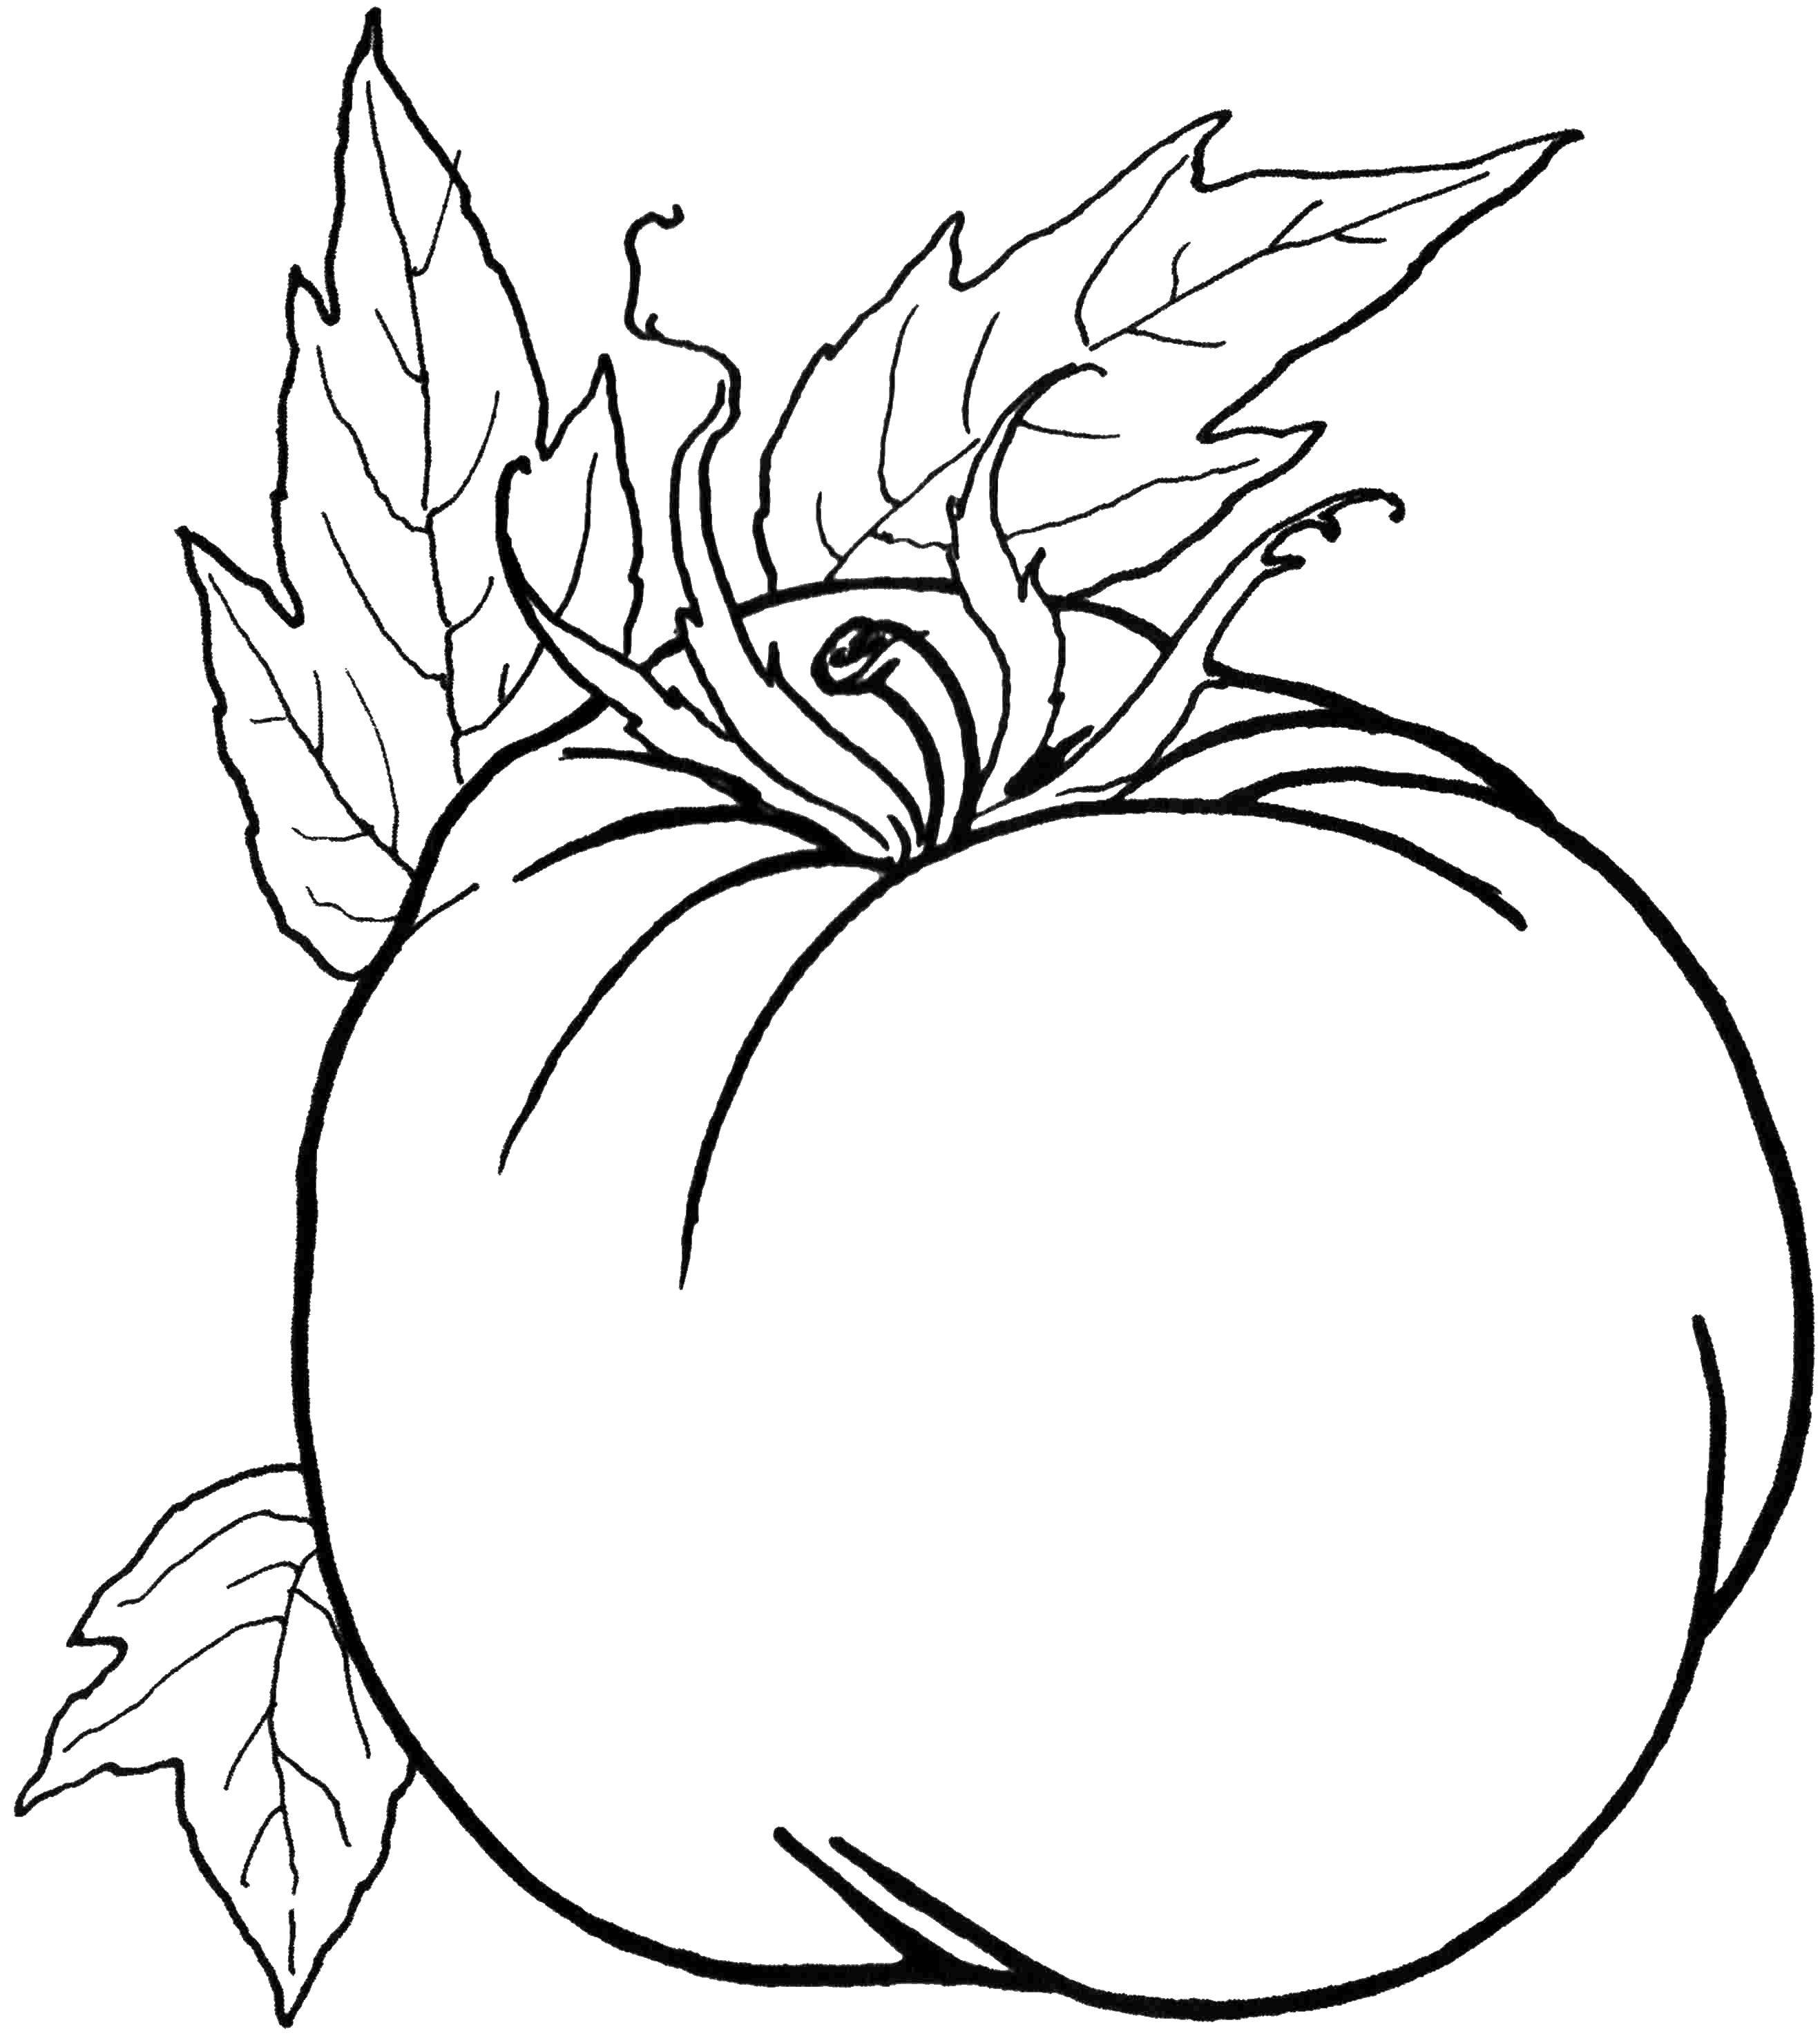 Coloring Ripe tomato. Category Vegetables. Tags:  Vegetables.